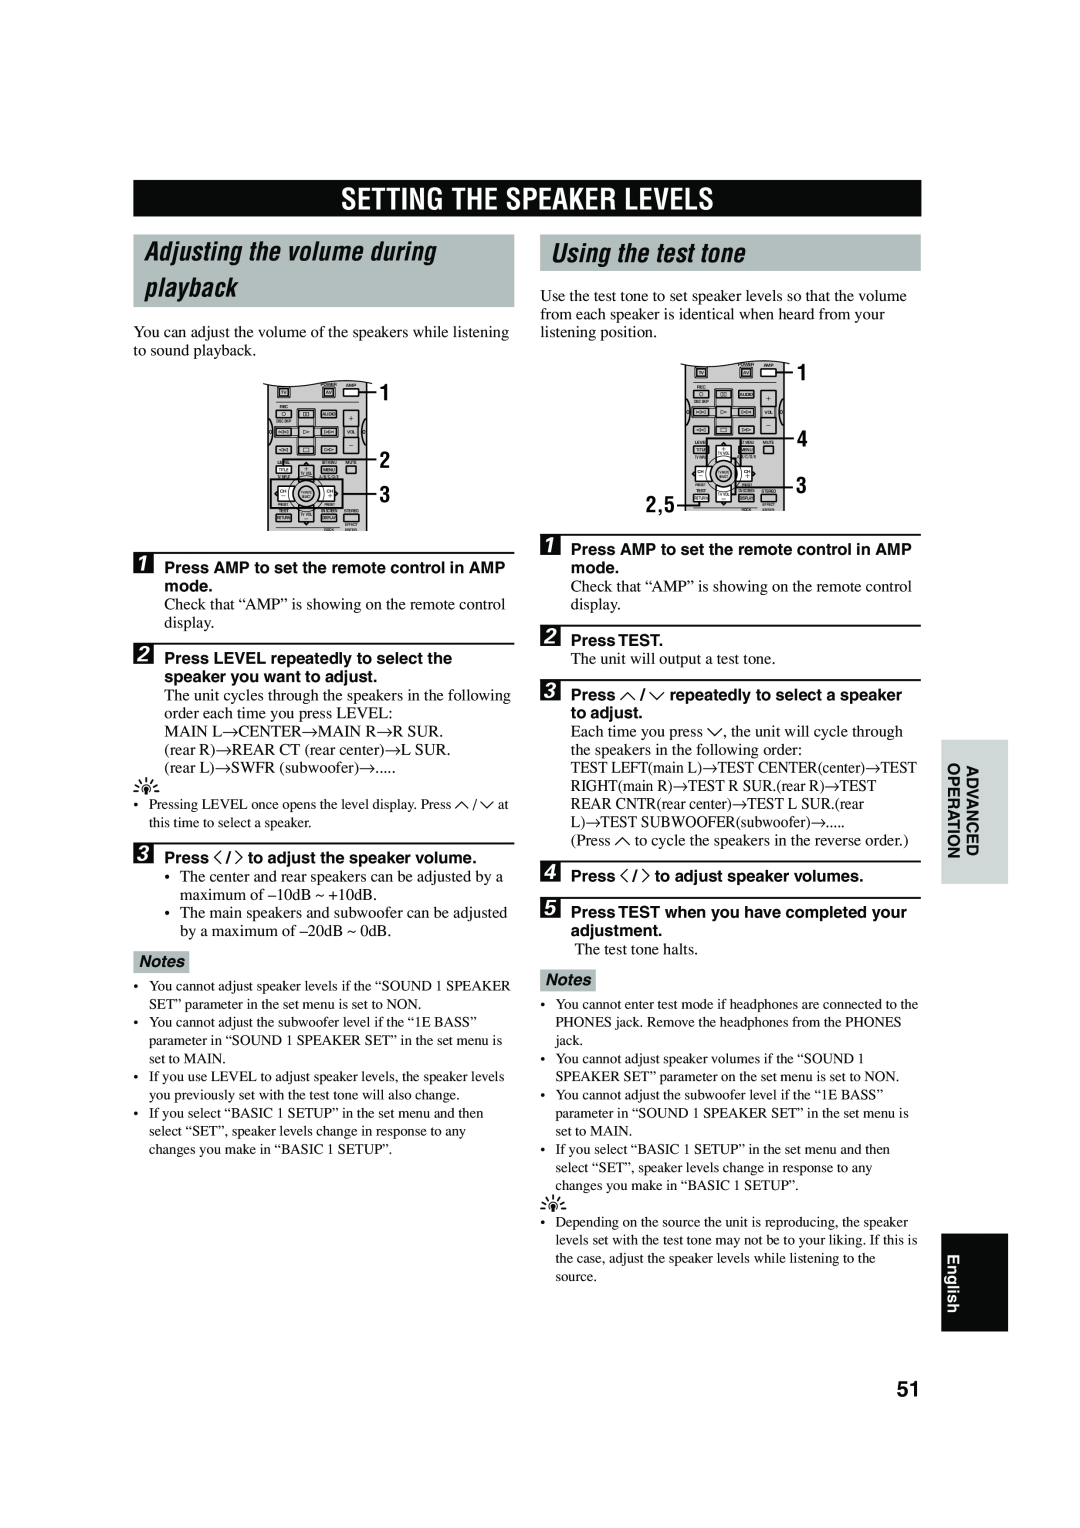 Yamaha RX-V740 owner manual Setting The Speaker Levels, Adjusting the volume during playback, Using the test tone, English 